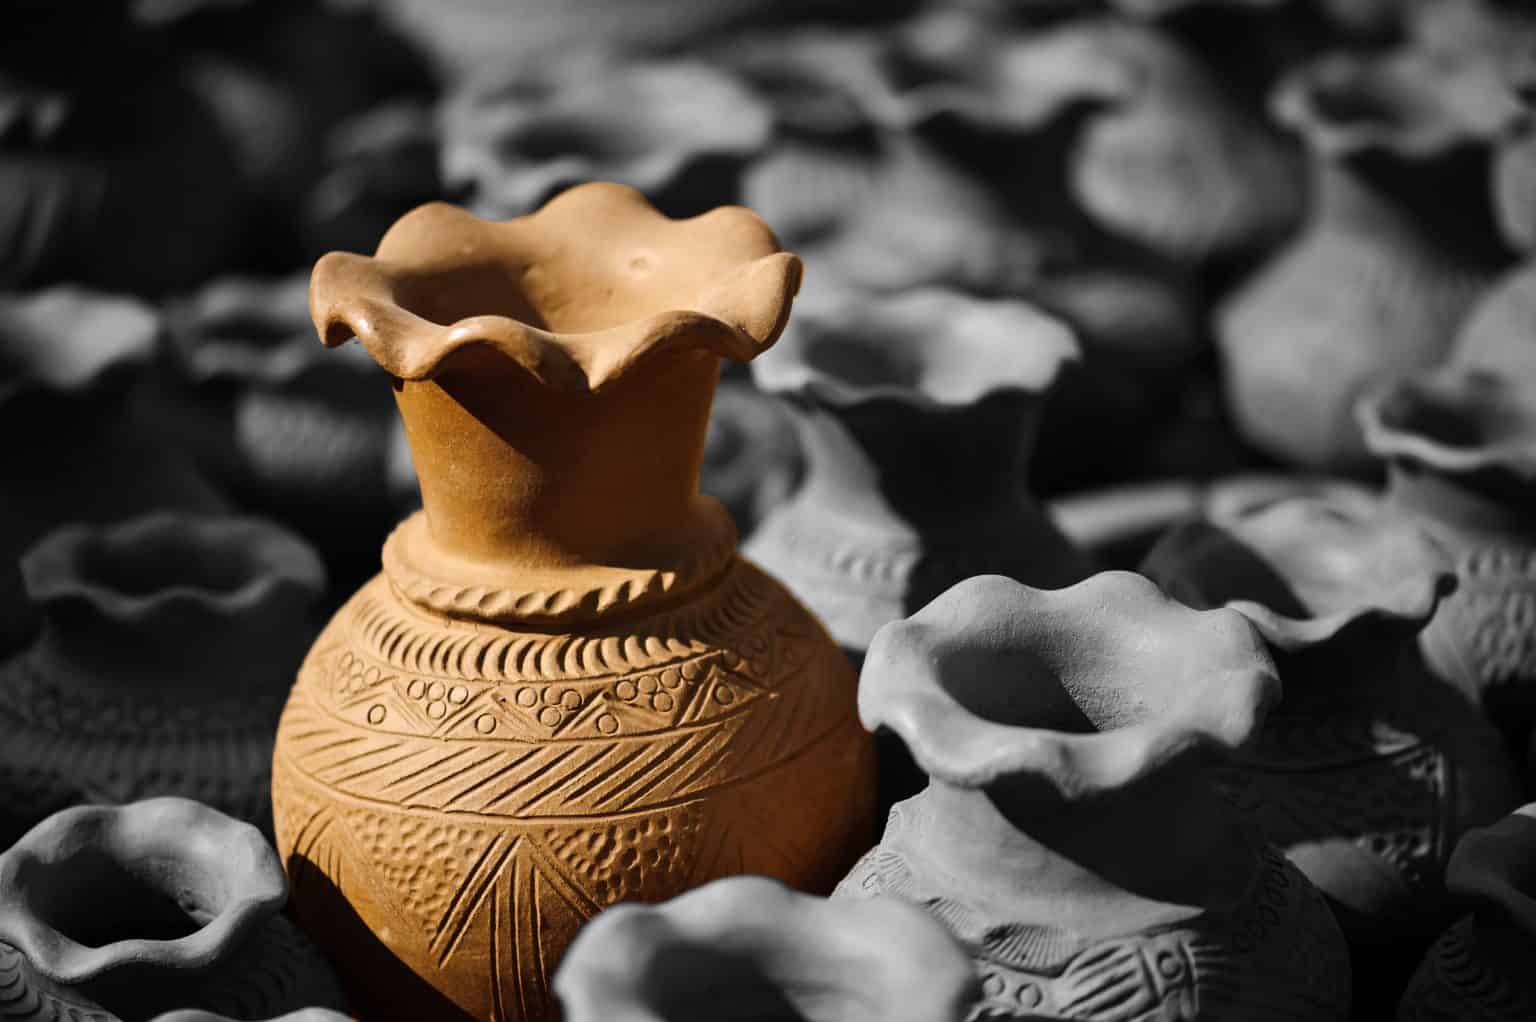 A Bau Truc potter turns clay into unique pottery items